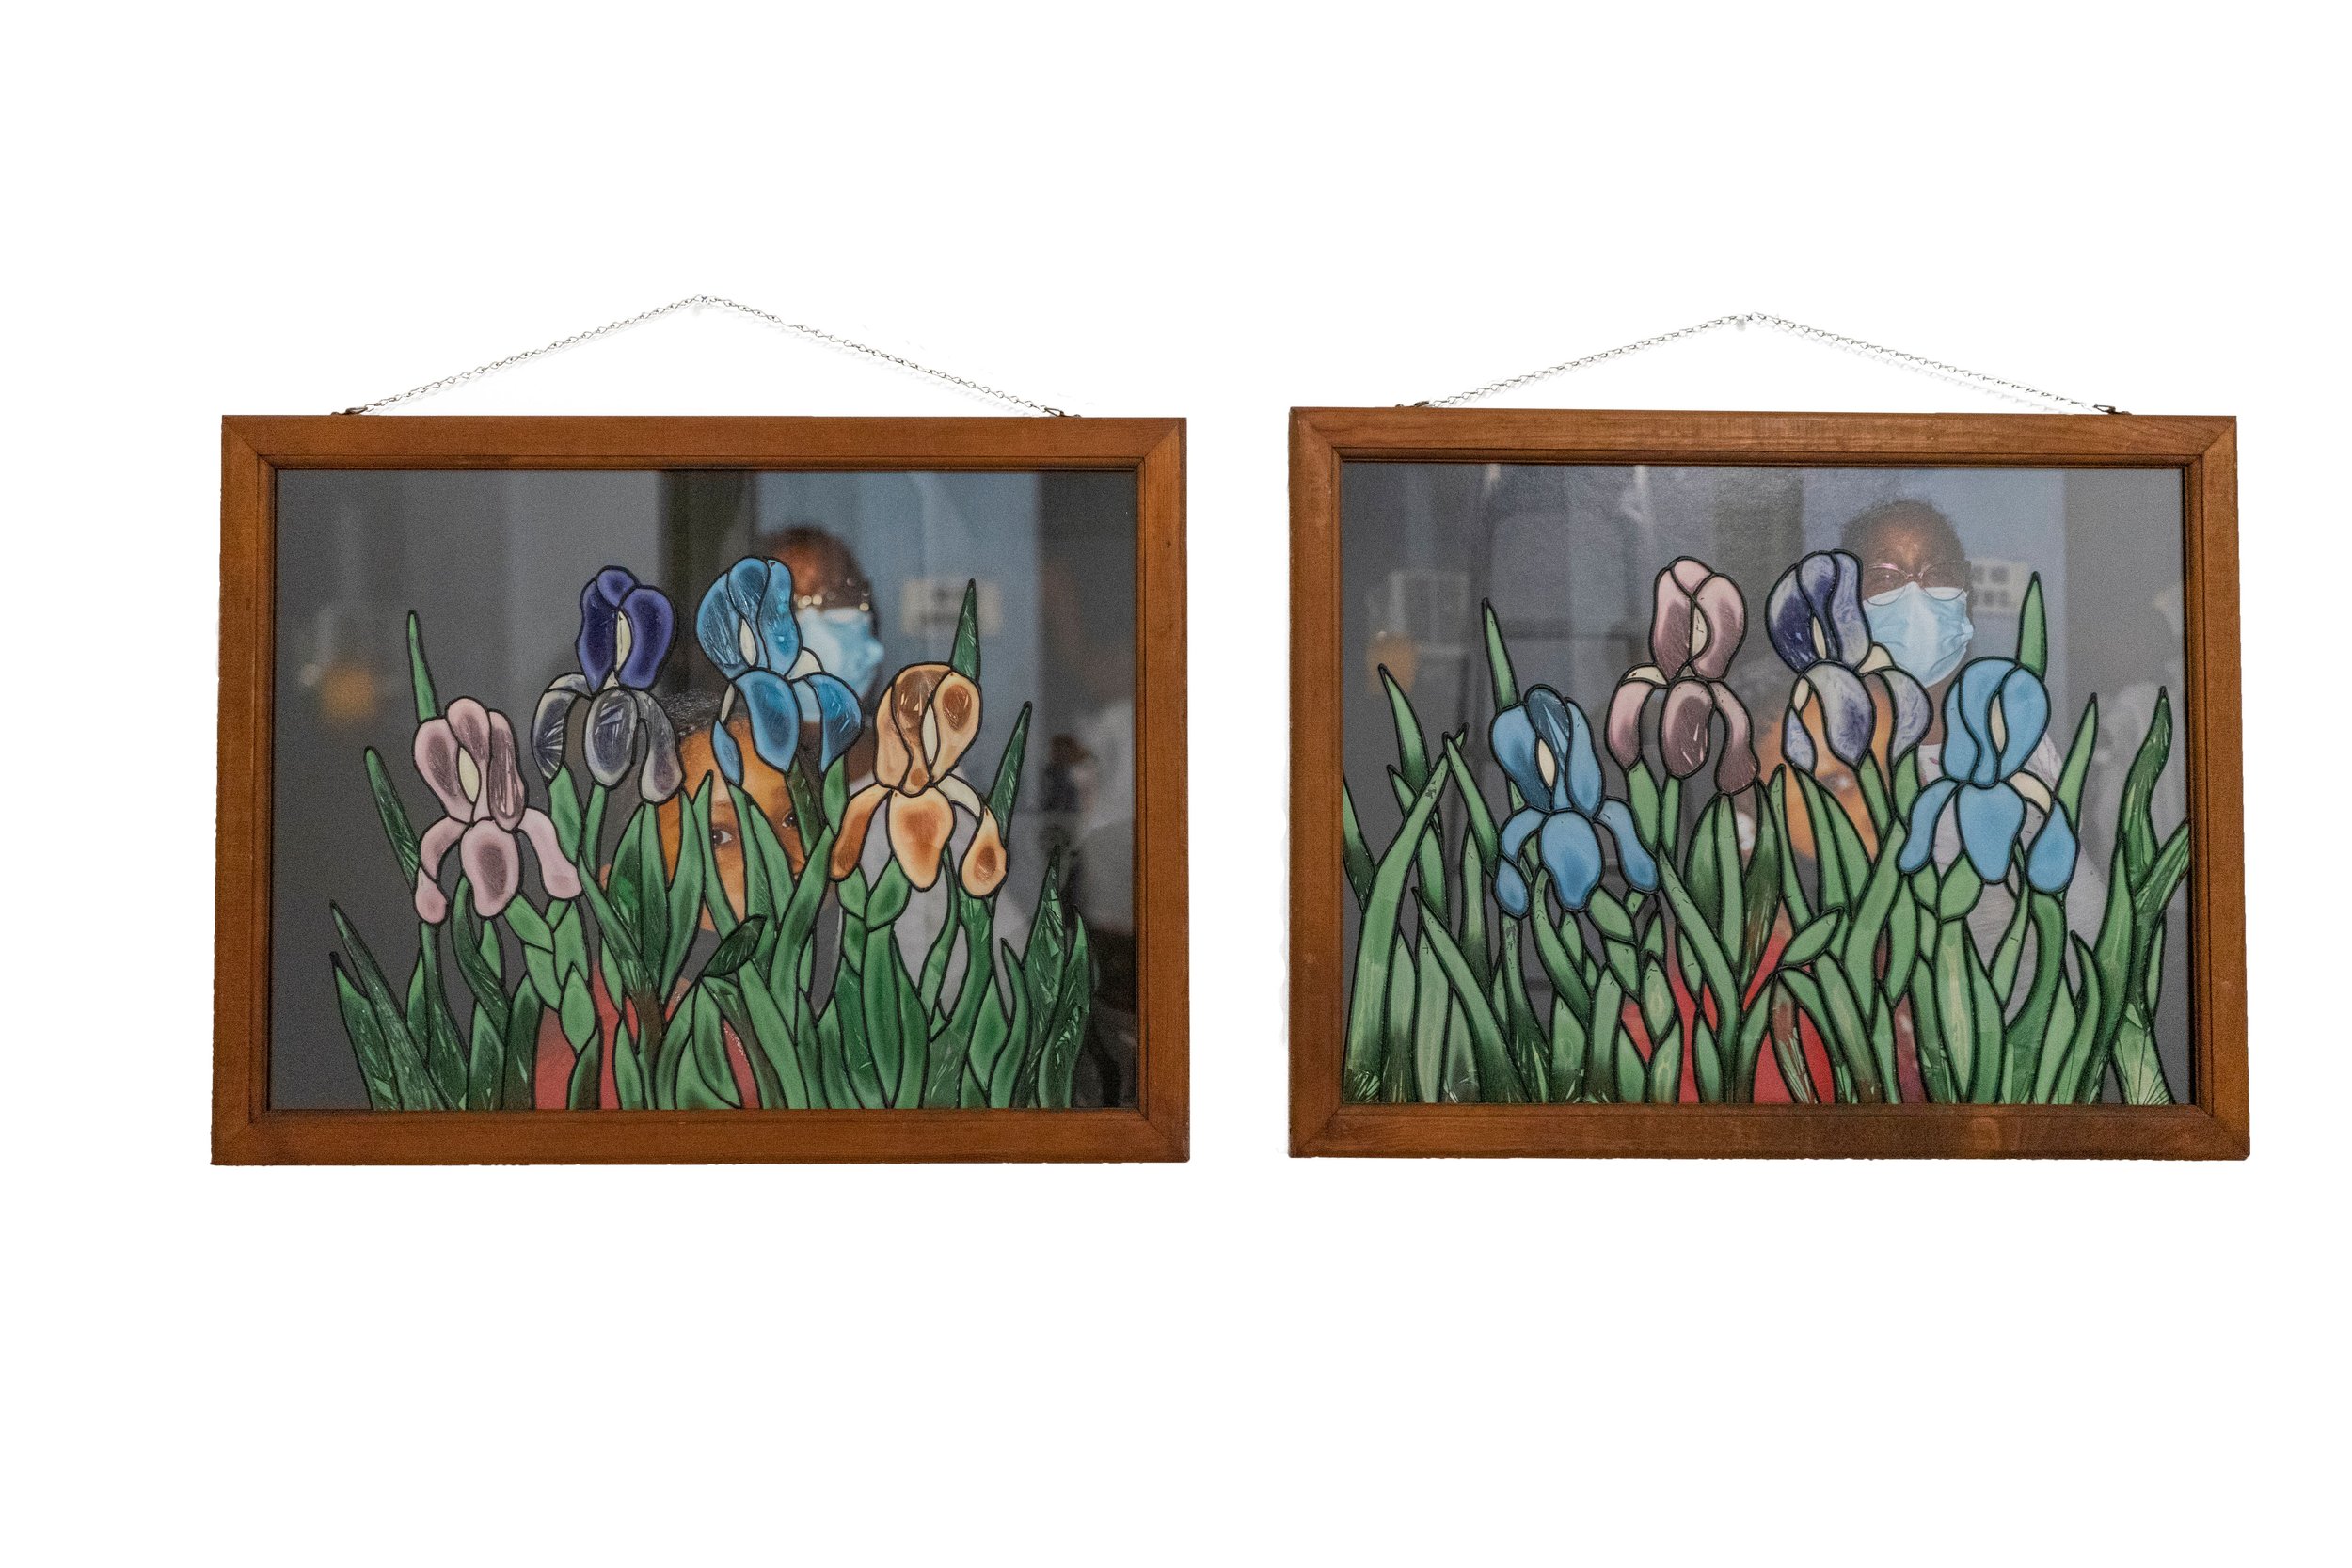  Roscoè B. Thické III.  Shifting Arrangements (diptych),  2022. Archival fine art print, Hahnemühle Baryta Satin 300gsm, framed in wood and painted glass, 20 x 30 in. each  Courtesy of the artist 